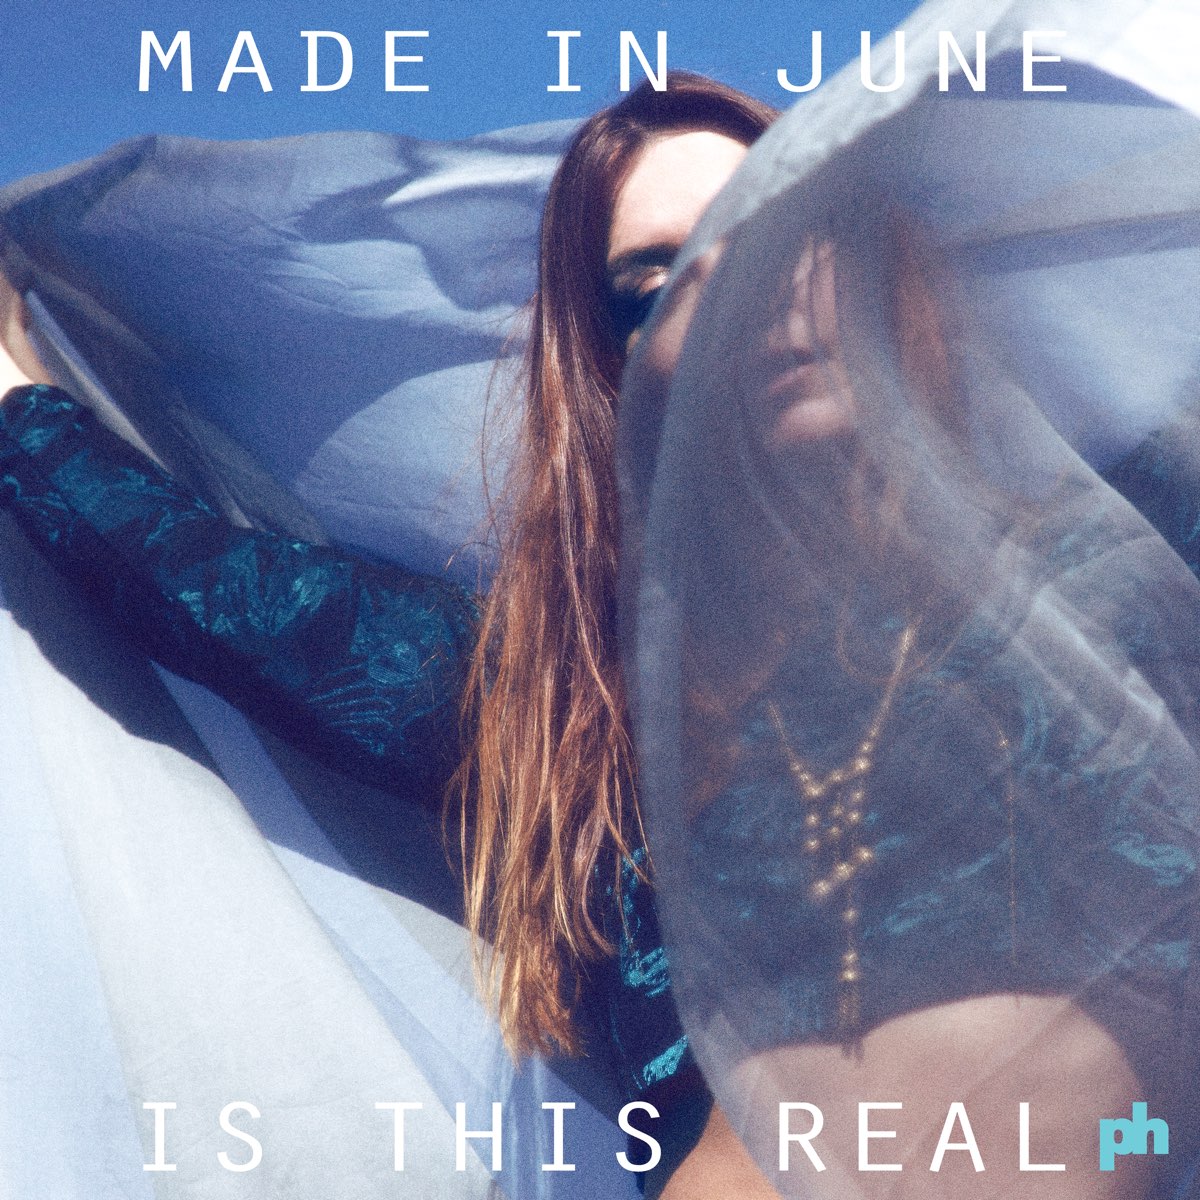 Could this be real. This is real текст. Текст песни this is real. On June или in June. Made in reality.